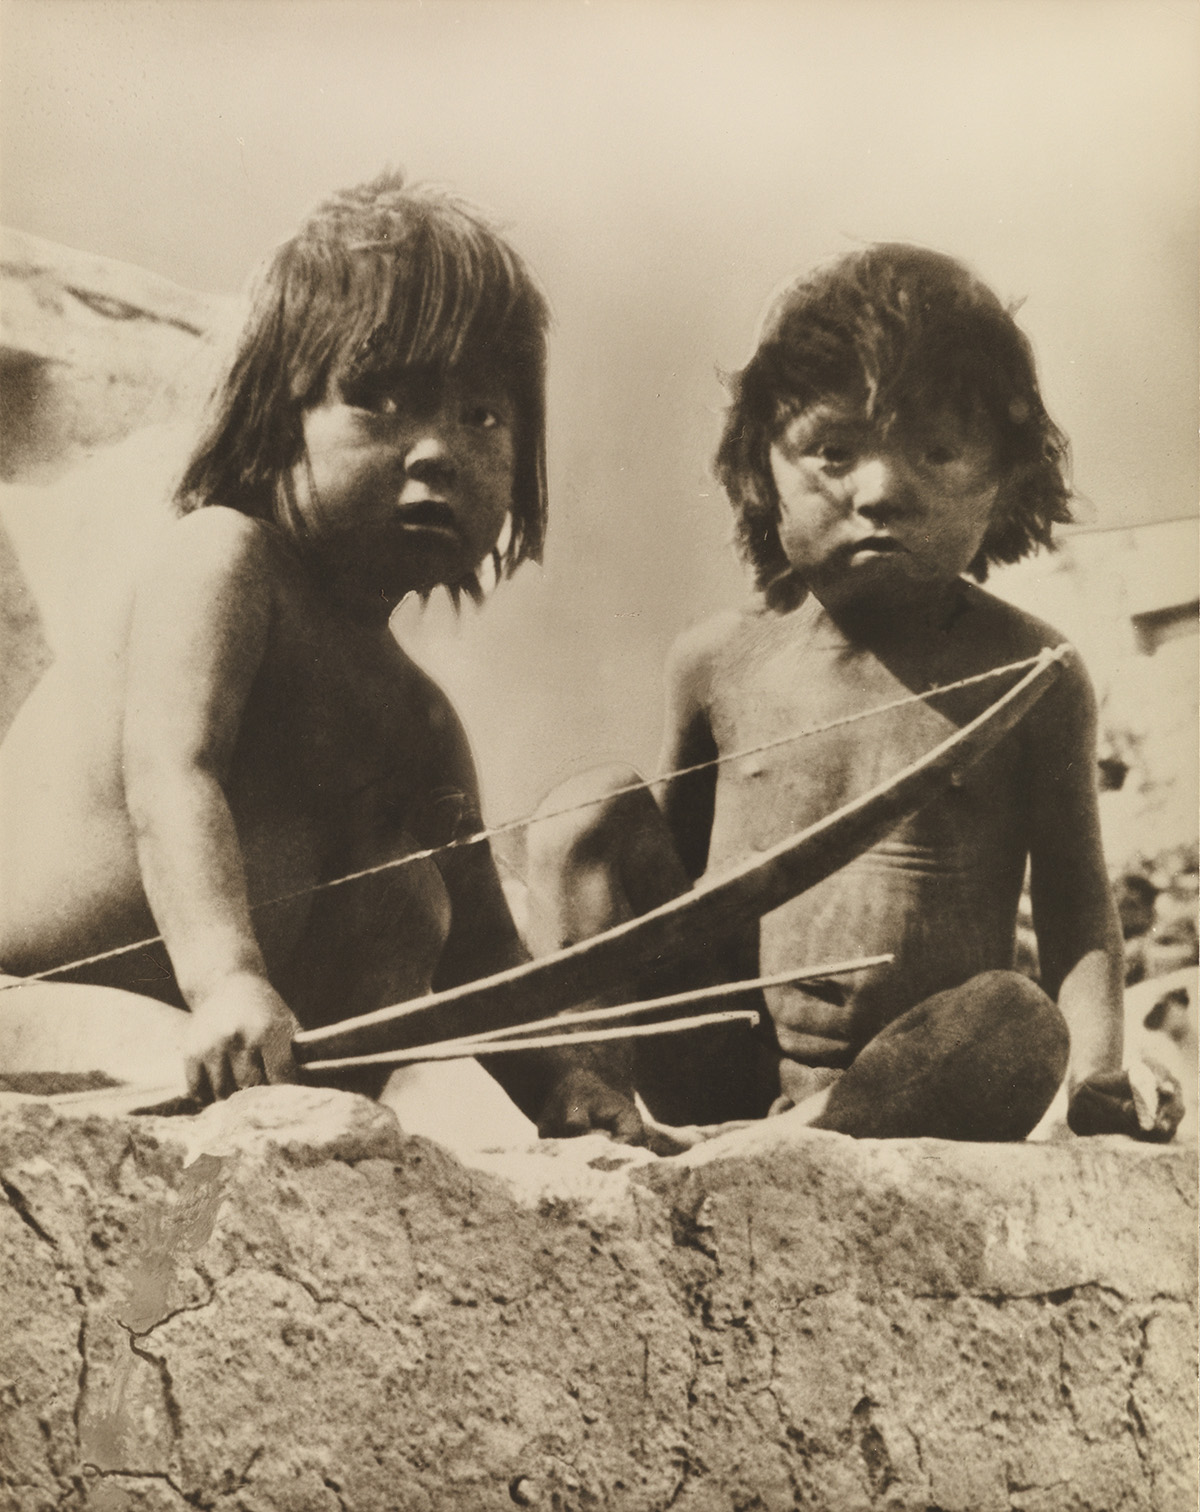 FREDERICK MONSEN (1865-1929) Group of 4 photographs of Native American figures, 3 depicting children.